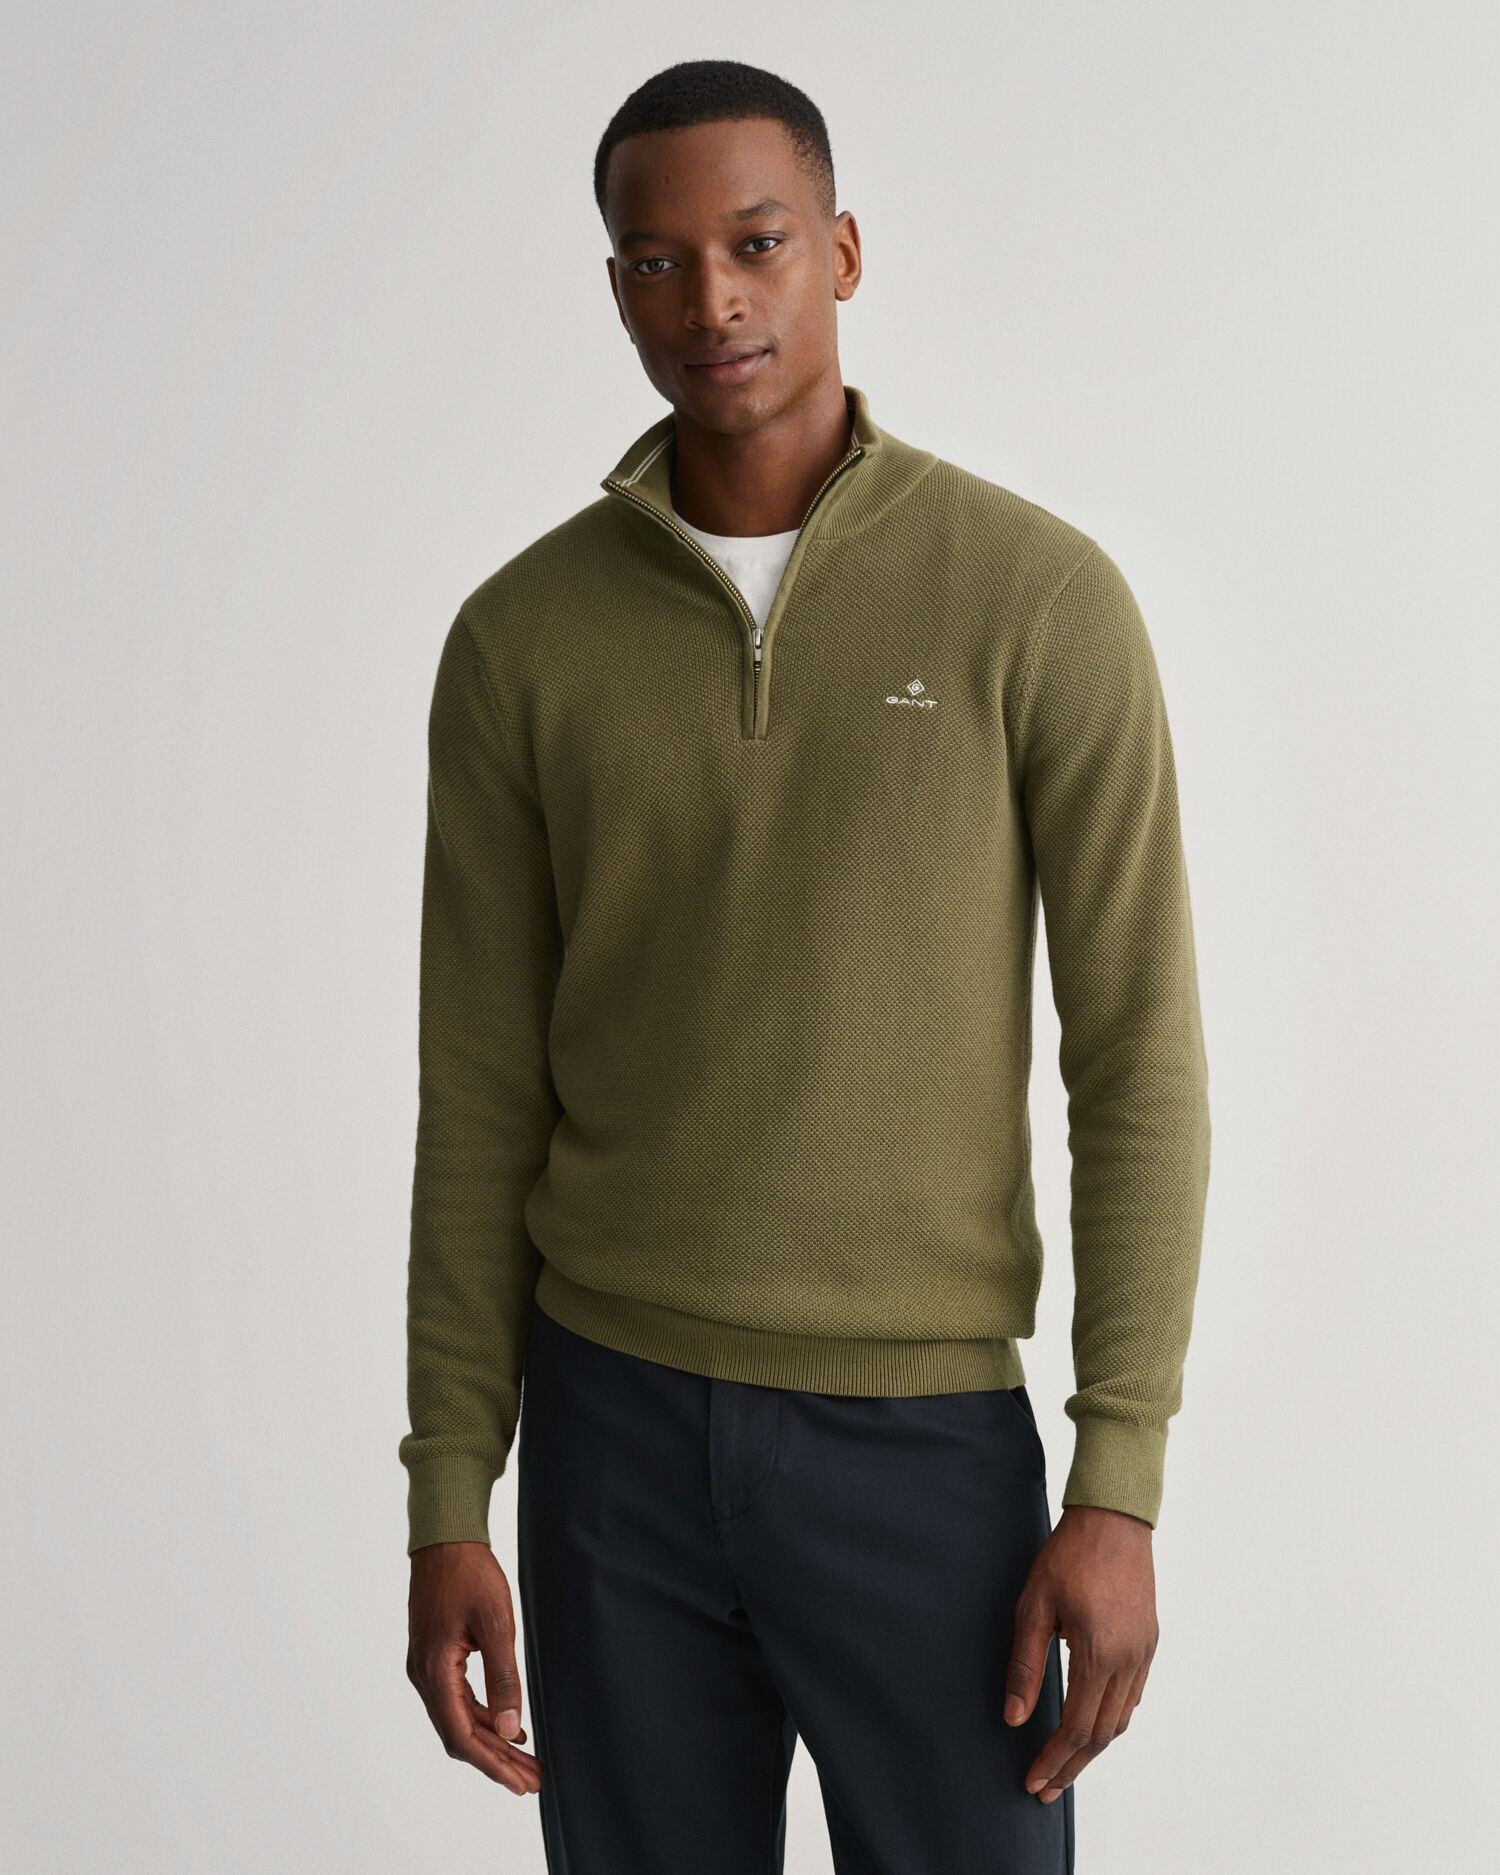 GANT Cotton Piqué Half-zip Sweater in Grey for Men Mens Clothing Sweaters and knitwear Zipped sweaters 